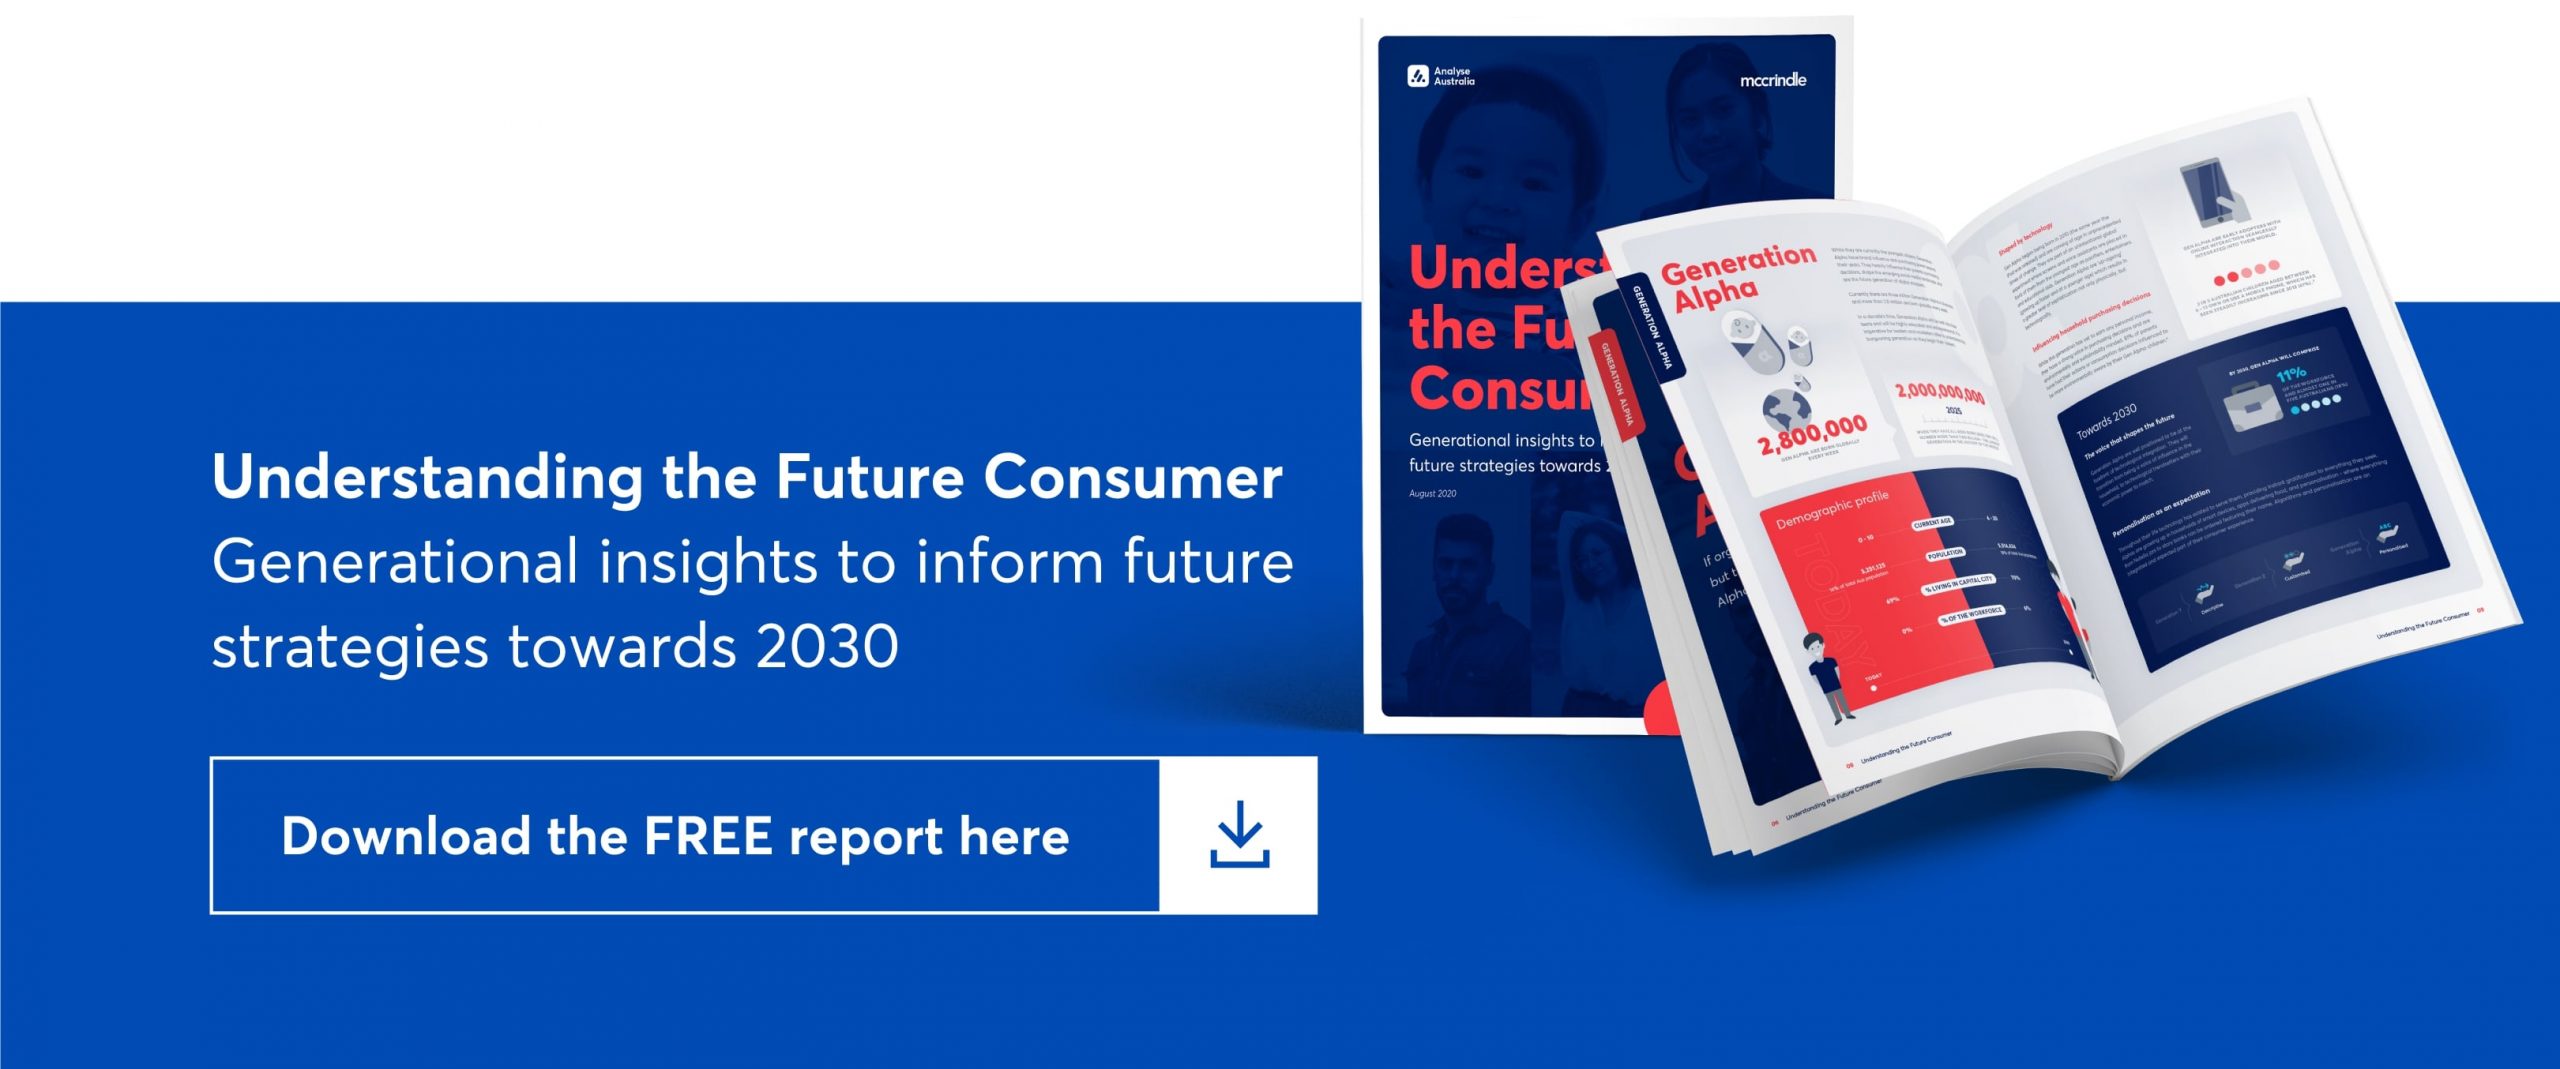 understanding the future consumer. generational insights to inform the future strategies towards 2030. download the report here.